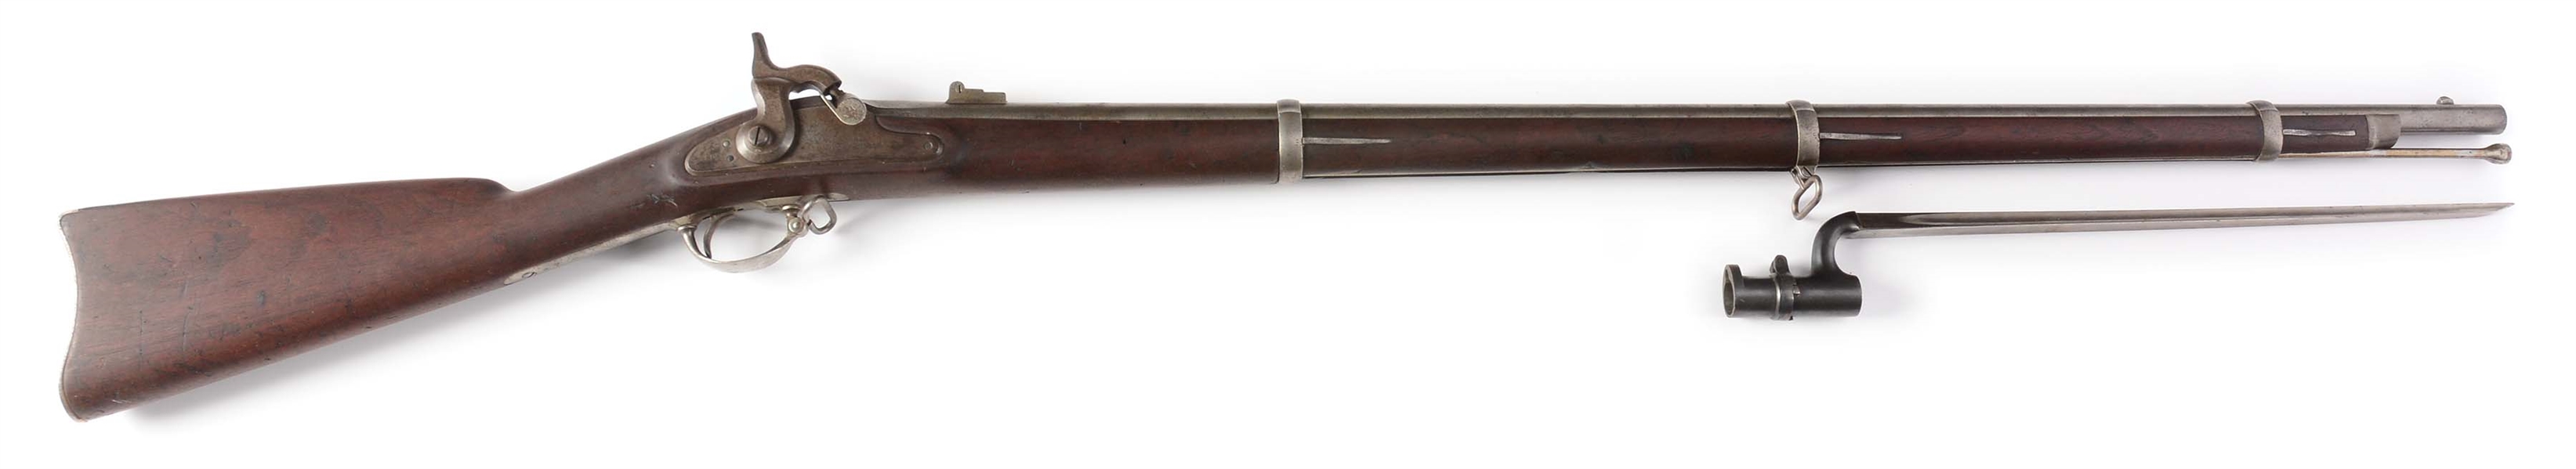 (A) US SPRINGFIELD MODEL 1863 PERCUSSION RIFLE.